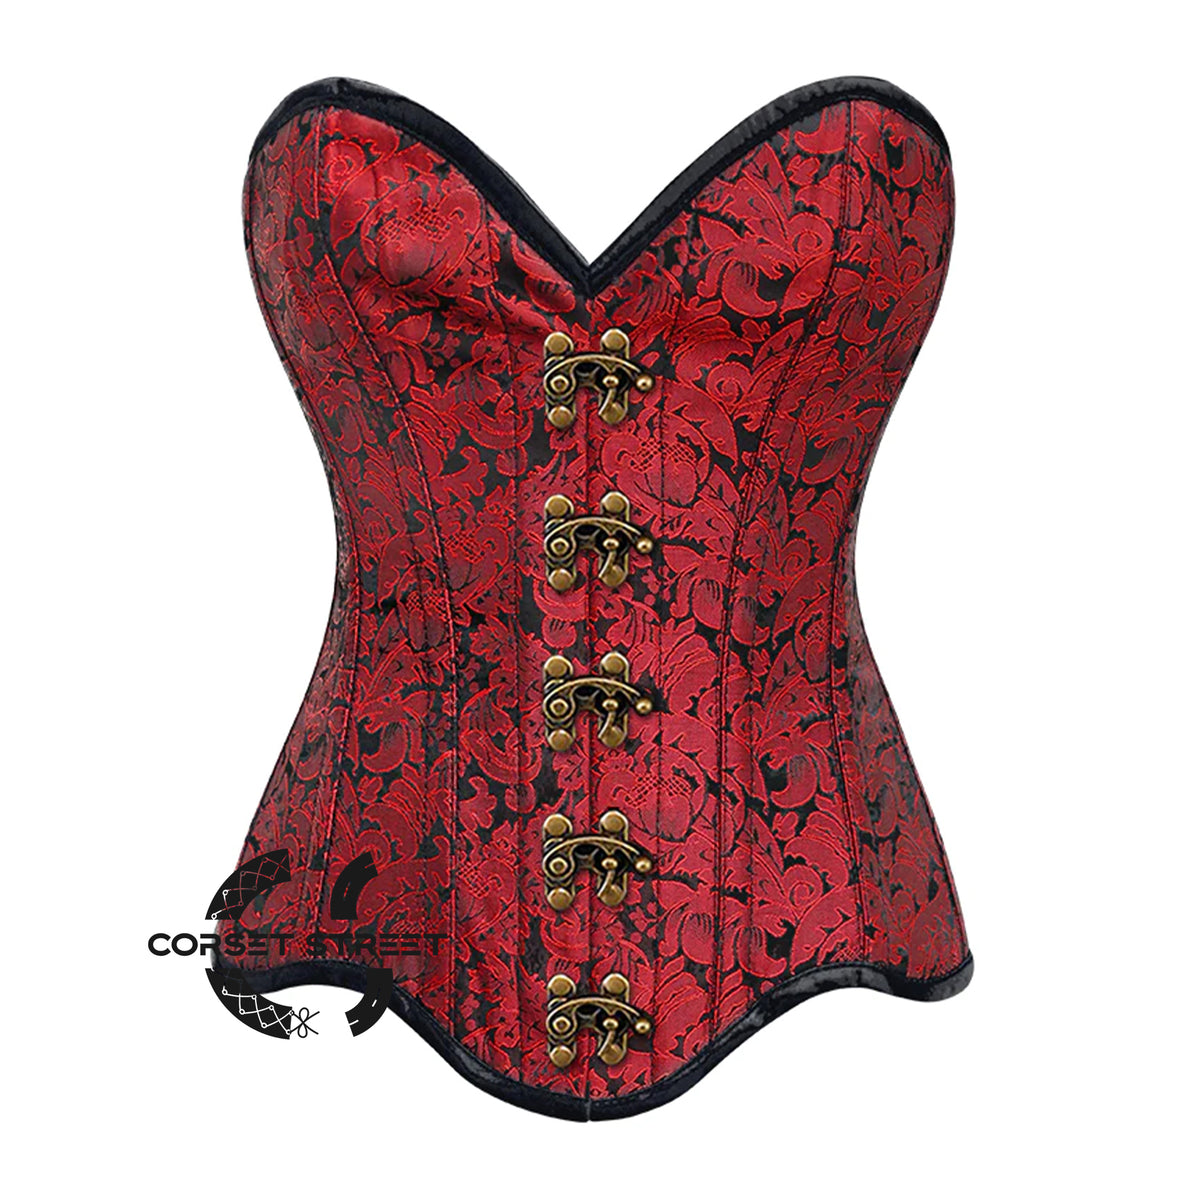 Red Brocade Curvy Design Front Antique Clasp Steampunk Gothic Overbust Corset